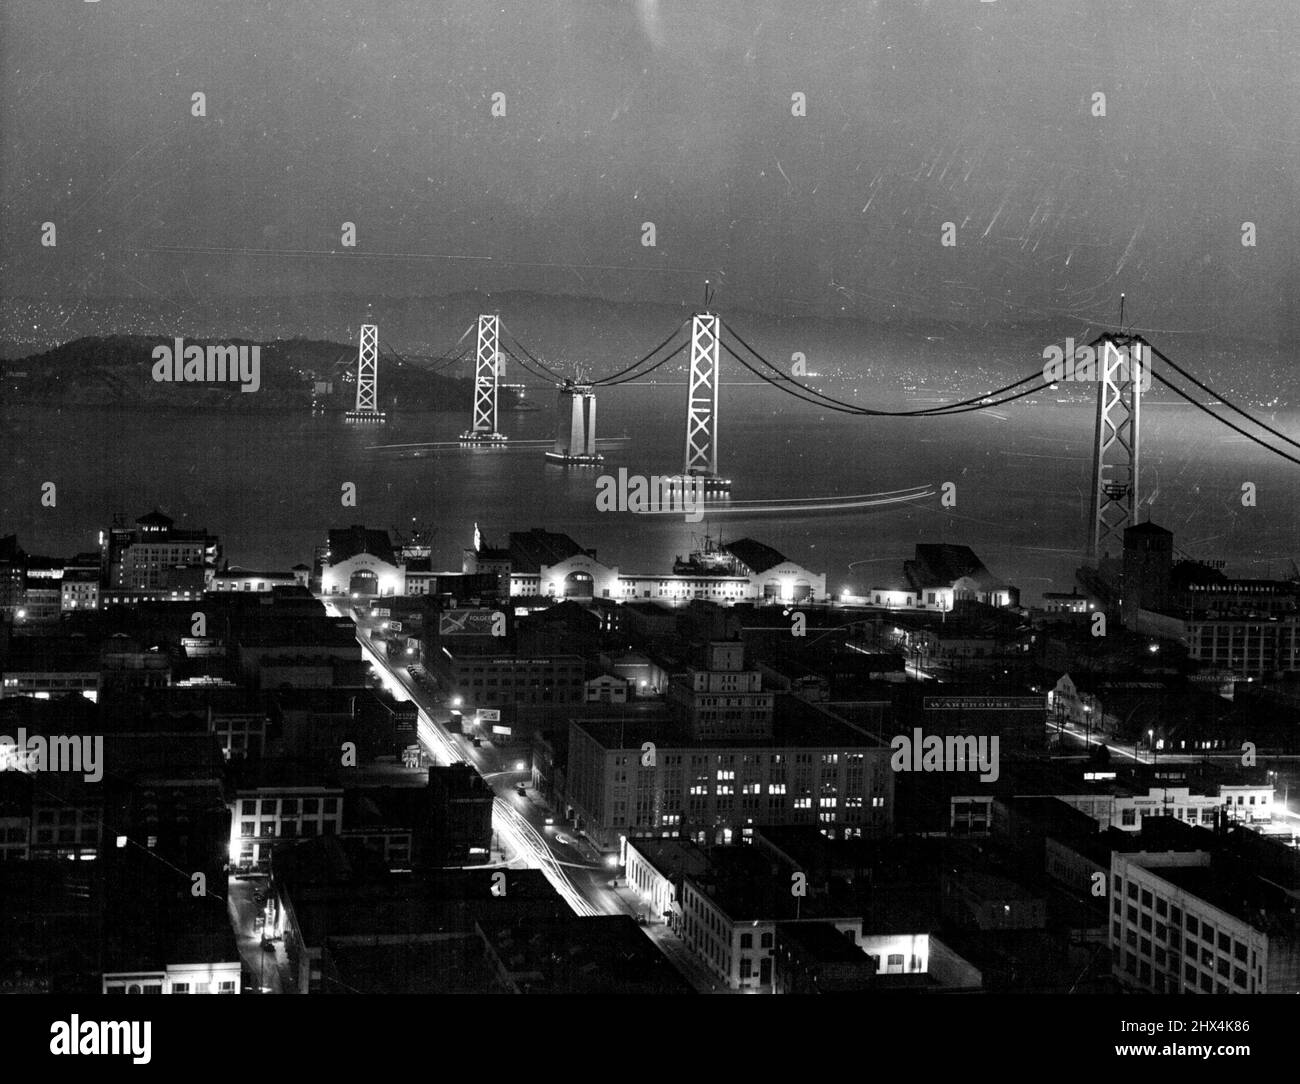 Lighted Bands Span San Francisco Bay -- San Francisco-Night and the sparkling lights which permit 24-hour-a-day work on the looping catwalks of the San Francisco -Oakland Bay Bridge present a contrasting scene of Beauty. The lighter bands stretch out across the water from the waterfront to Yerba Buena Island in the bay. November 19, 1935. (Photo by Associated Press Photo). Stock Photo